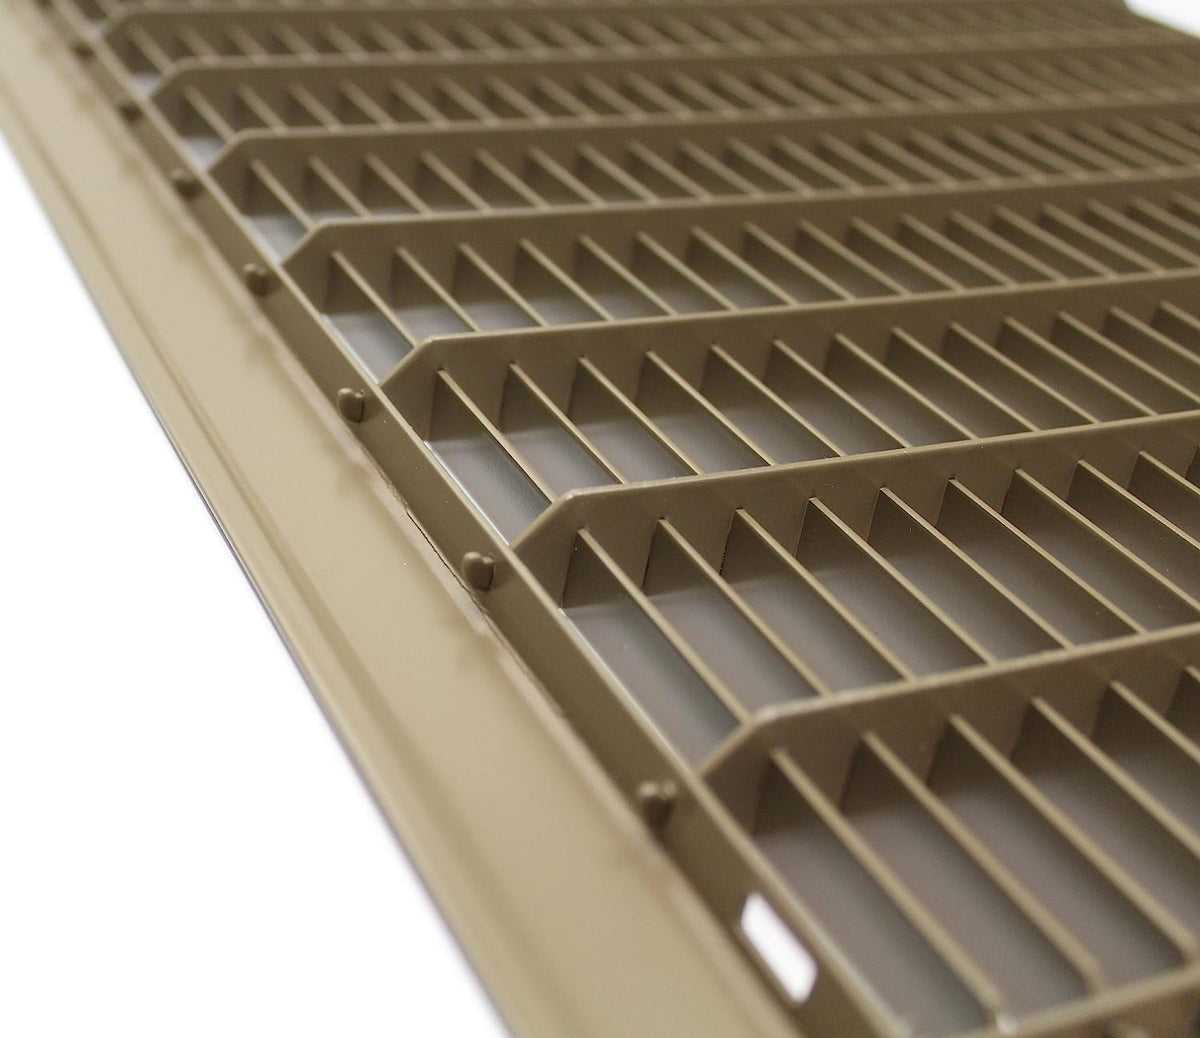 6&quot; X 20&quot; Or 20&quot; X 6&quot; Heavy Duty Floor Grille - Fixed Blades Air Grille - Brown [Outer Dimensions: 7.75 X 21.75]